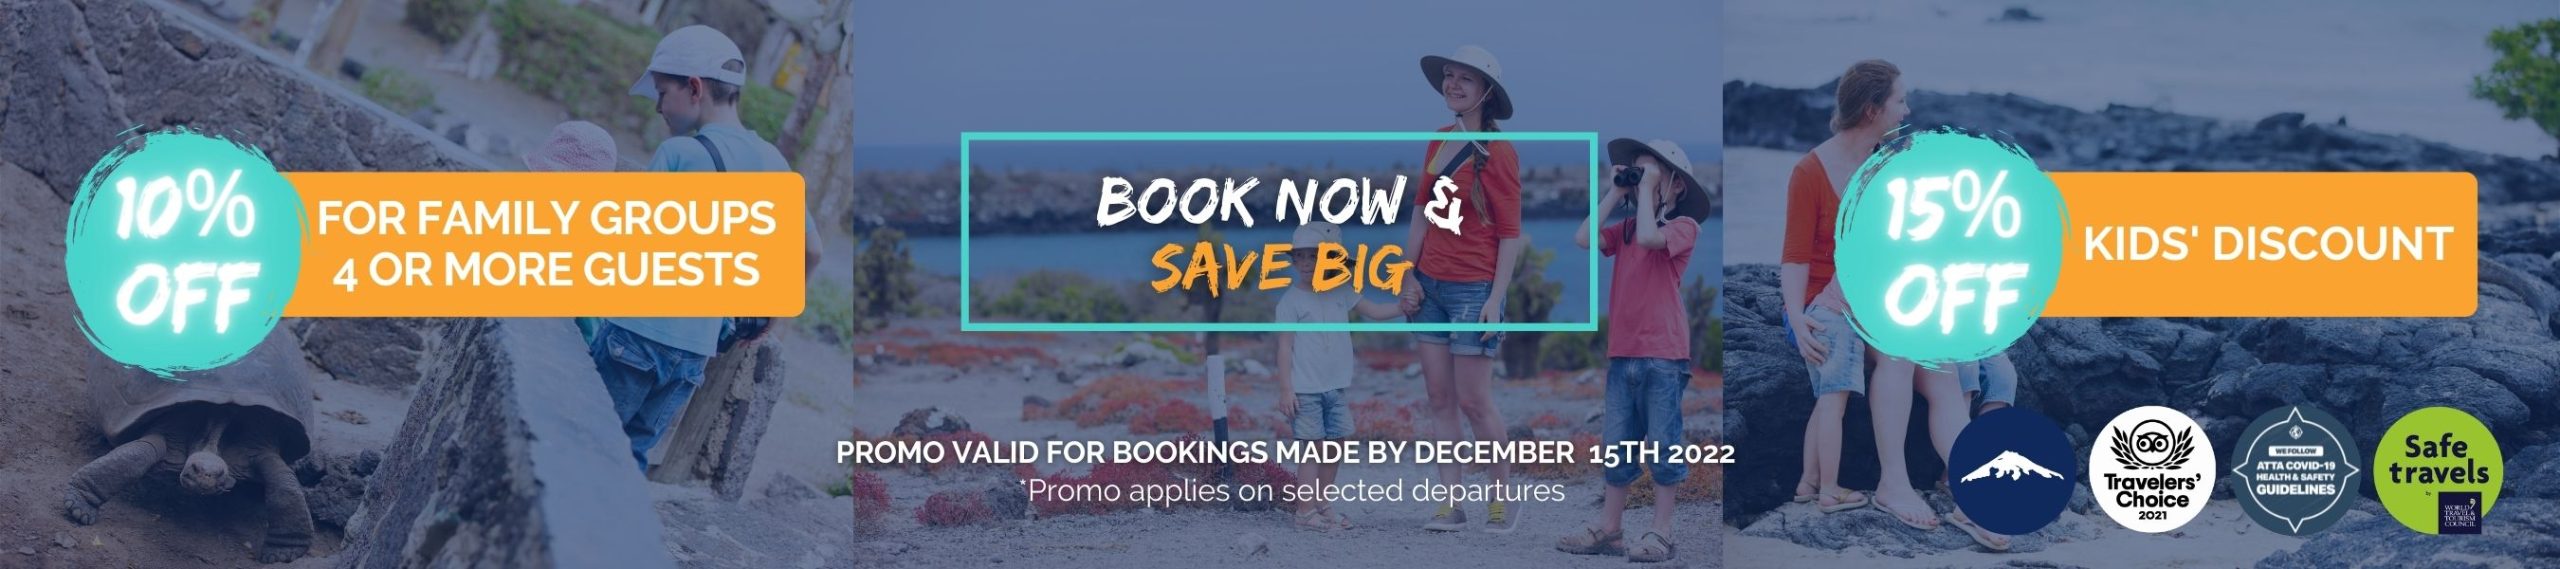 BOOK NOW AND SAVE BIG PROMOTION